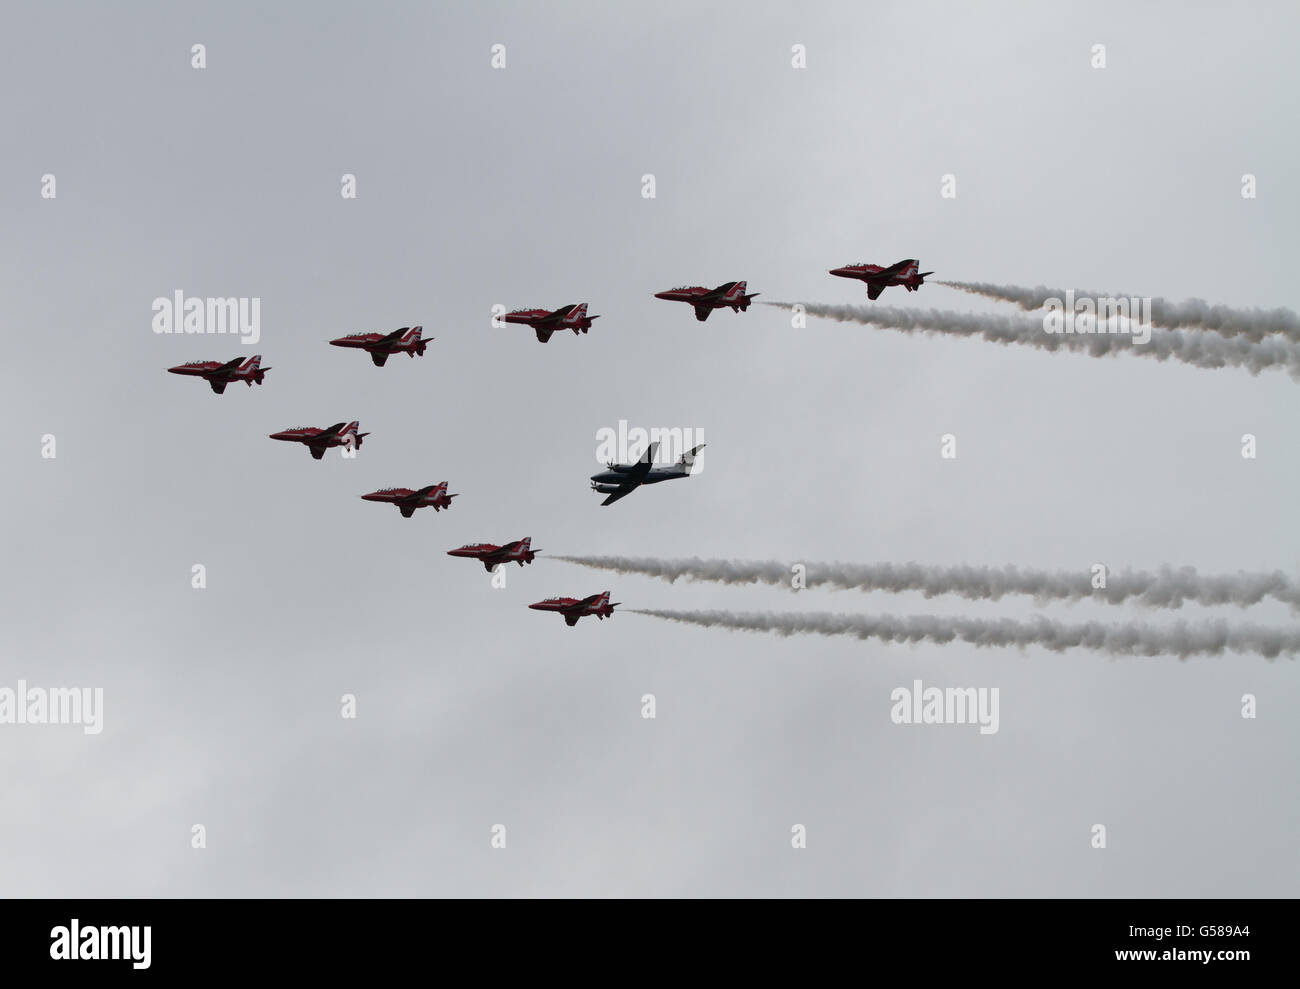 The RAF Red Arrows perform a flypast with RAF King Air passenger aircraft at Cosford Air Show Stock Photo